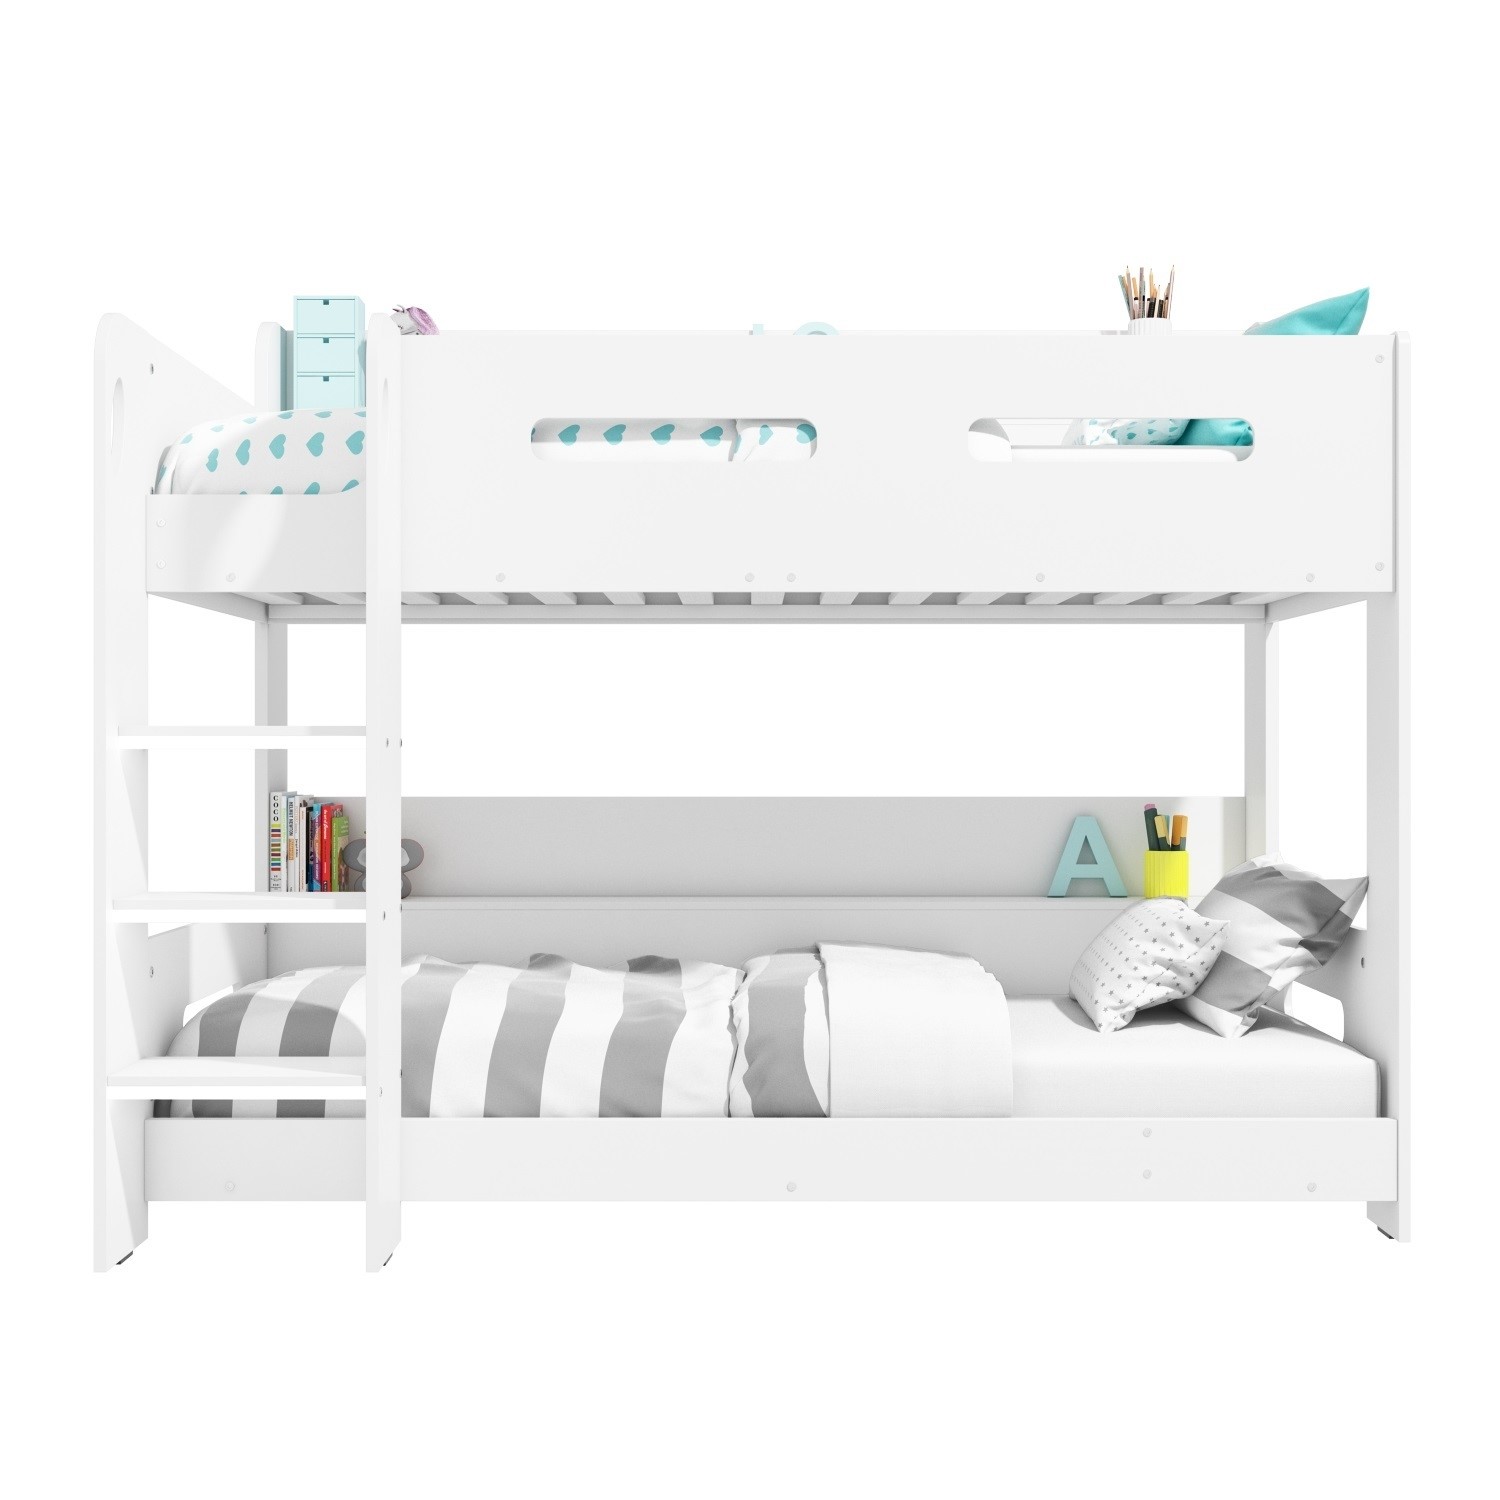 Read more about White bunk bed with shelves sky